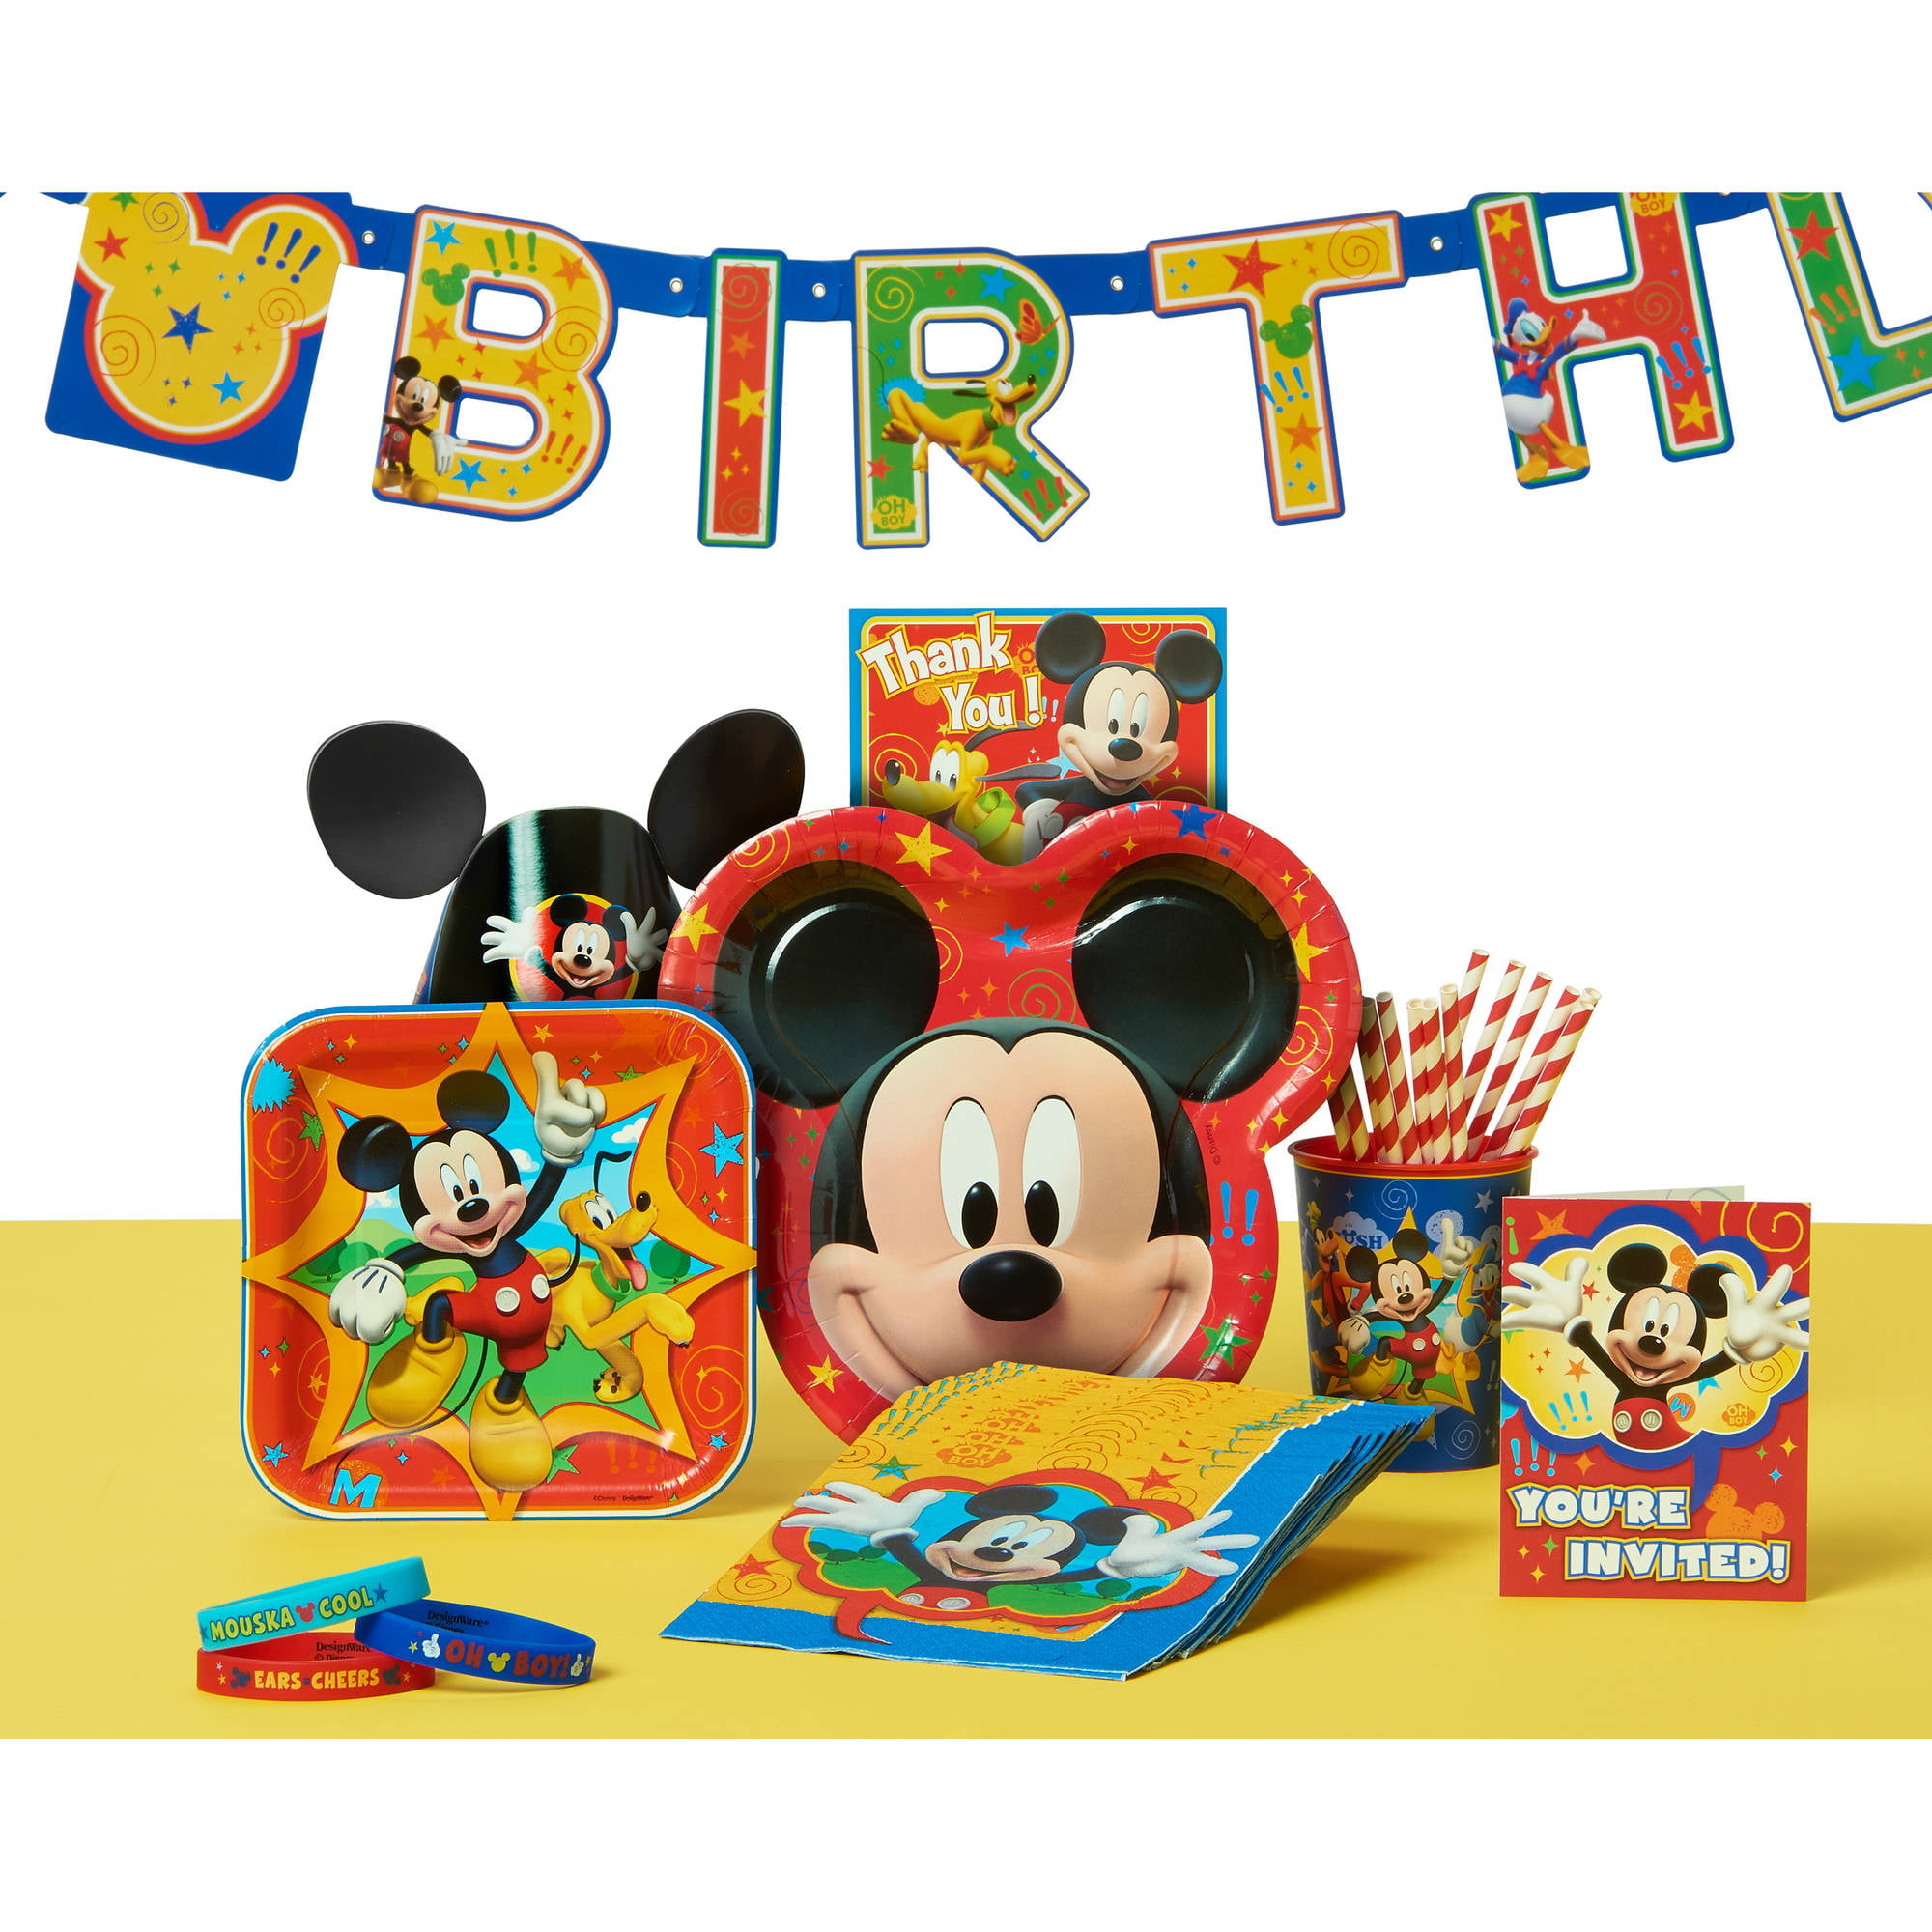 TradeMart Inc Party Favor 361833 Amscan Disney Mickeys Fun to be One Value Pack Confetti 12 Ct